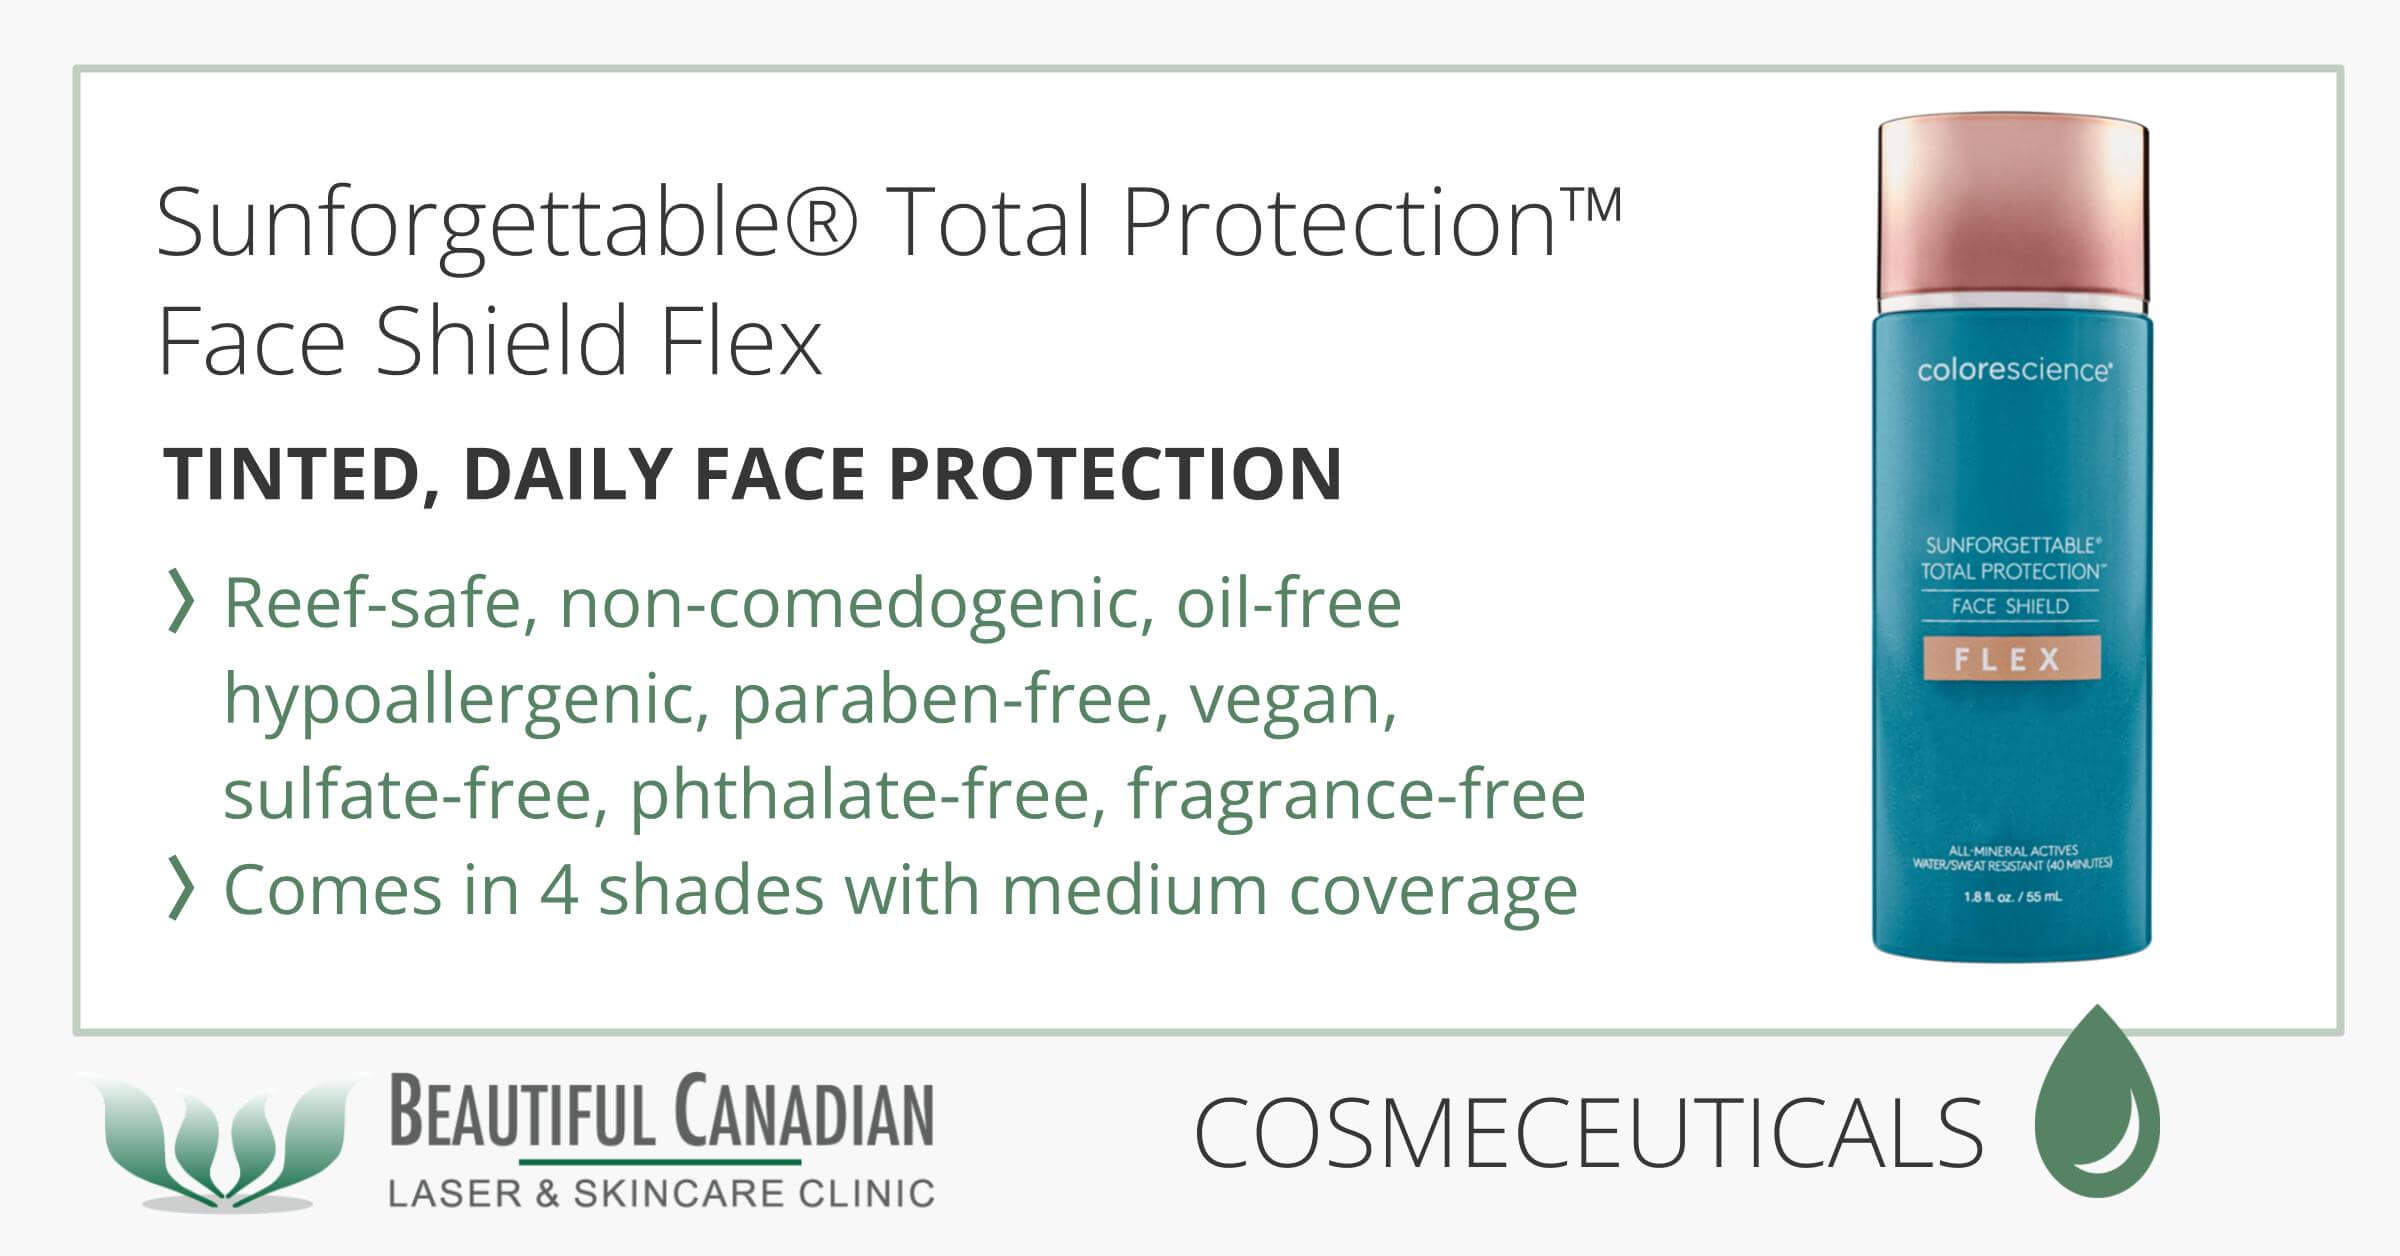 SUNFORGETTABLE® TOTAL PROTECTION™ FACE SHIELD FLEX SPF 50